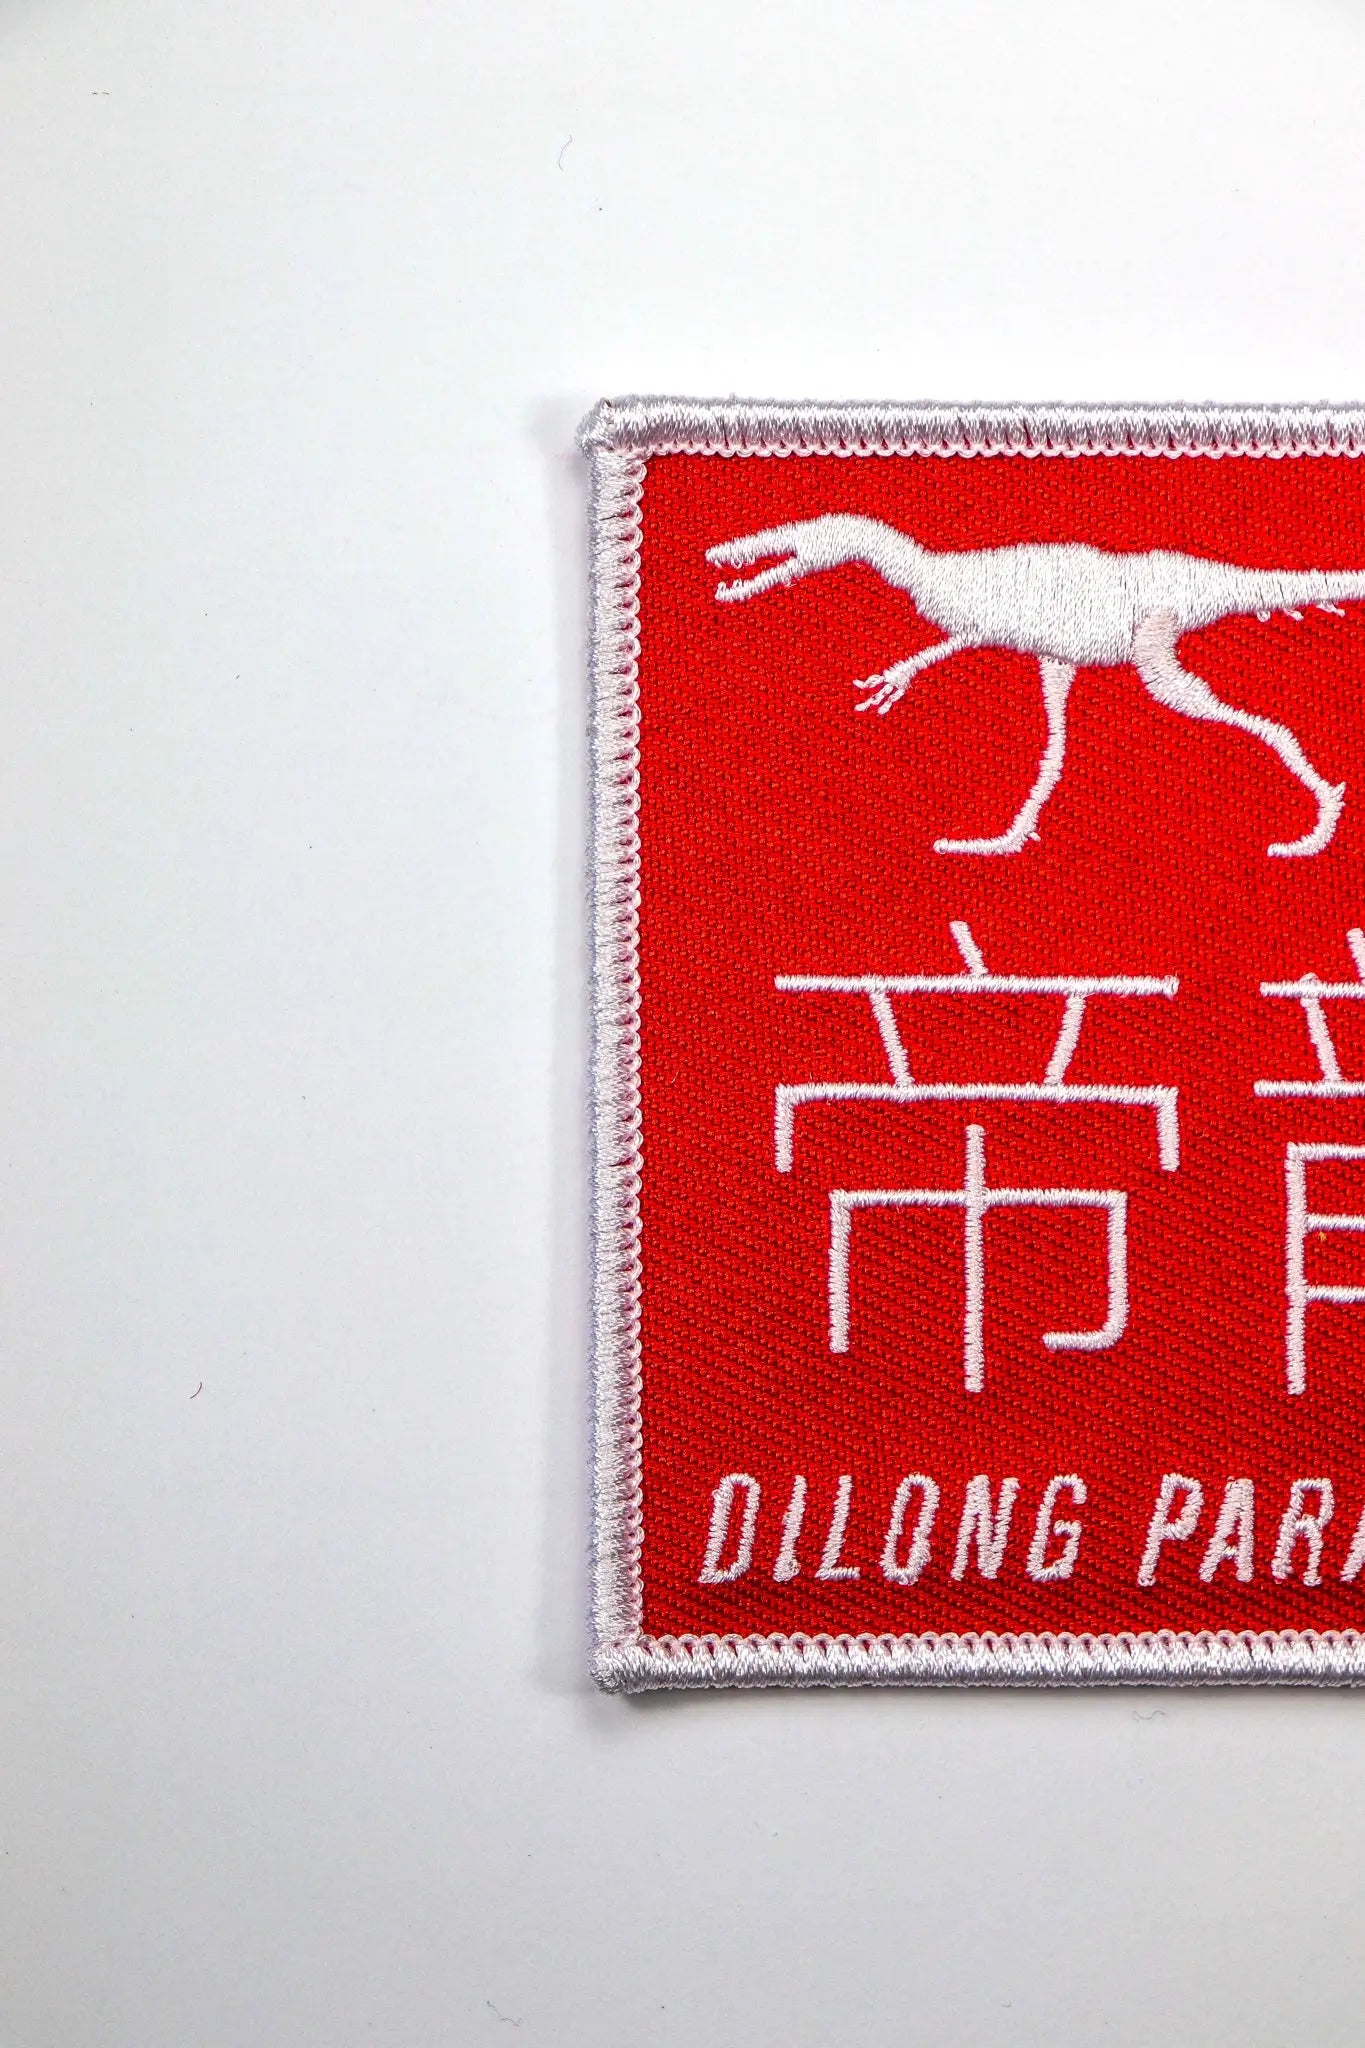 Dilong Paradoxus Dinosaur Patch - THE STEMCELL SCIENCE SHOP